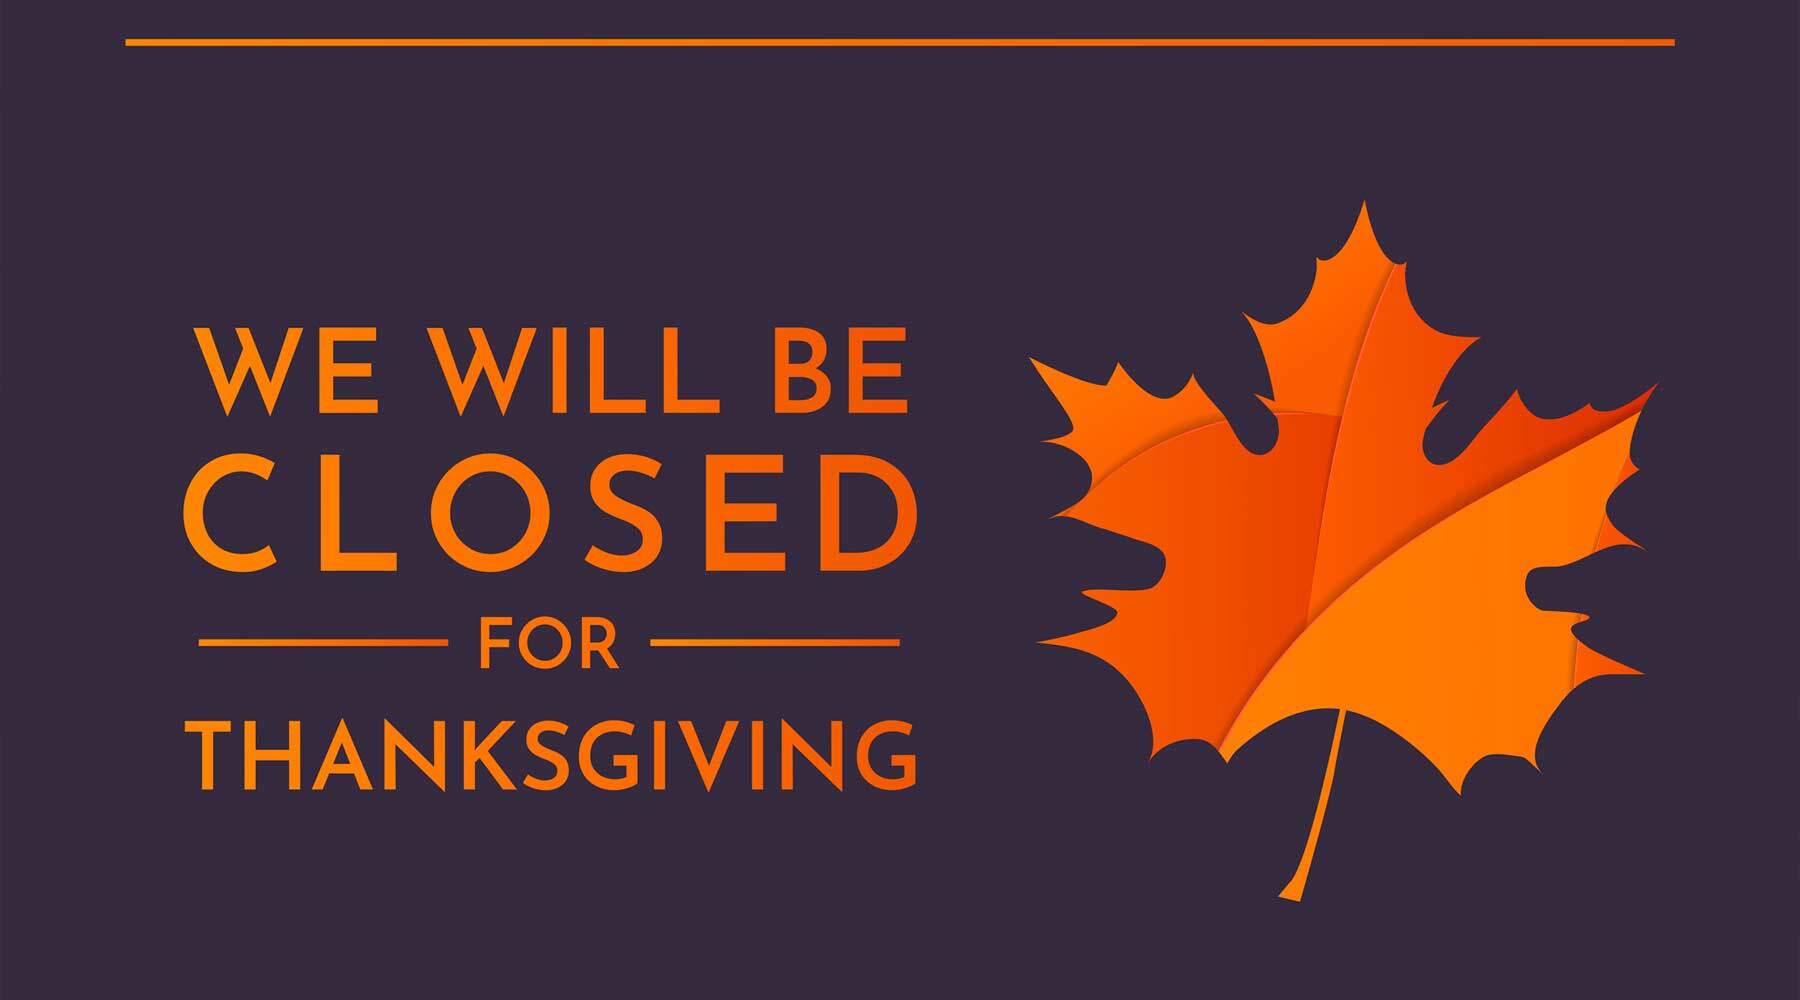 Closed for Thanksgiving Decorative Image